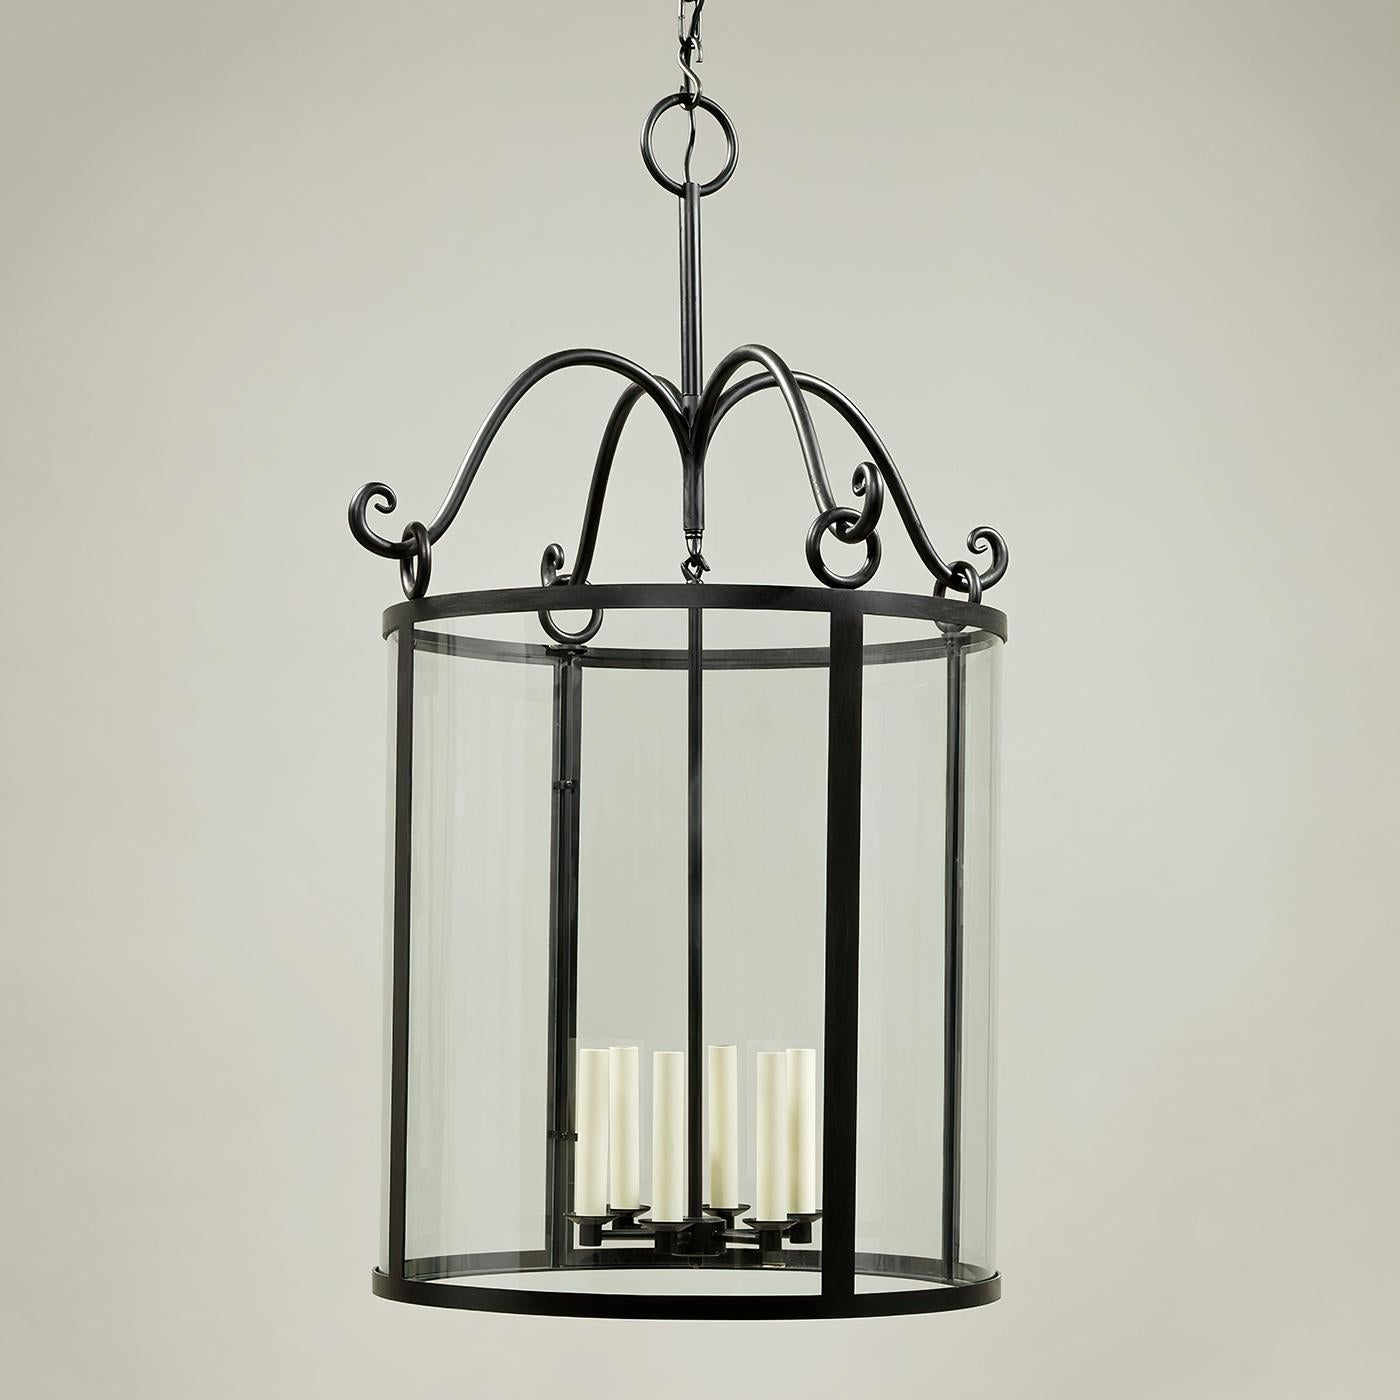 Rustic hall lantern, a whimsical design, this large hall lantern has a slightly rustic feel to it thanks to the swirling arms. Finished in black and hanging from a chain, it strikes a simple yet sophisticated note.

The Holbury Lantern is